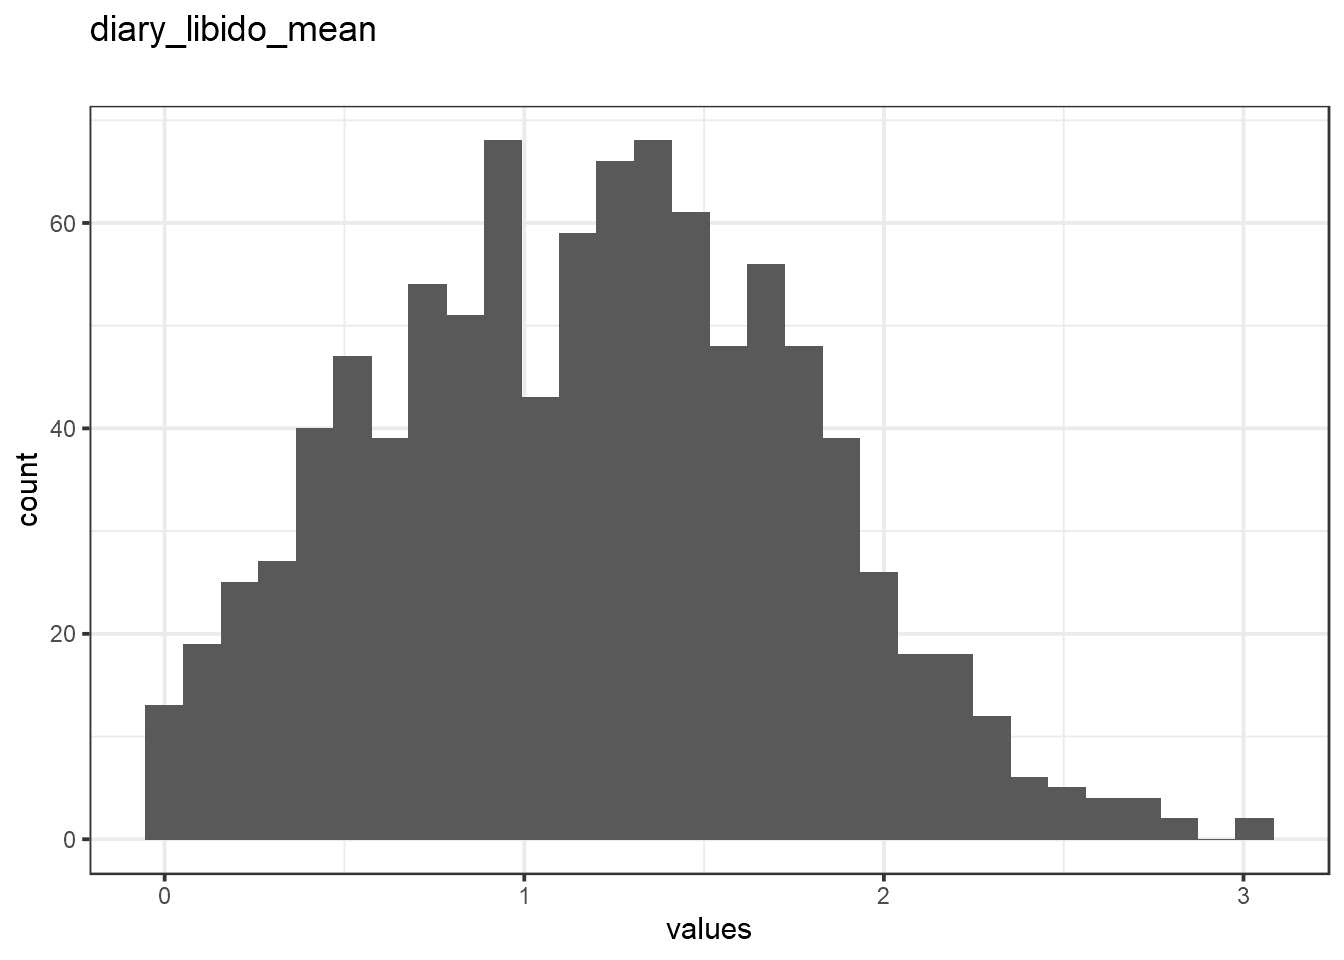 Distribution of values for diary_libido_mean